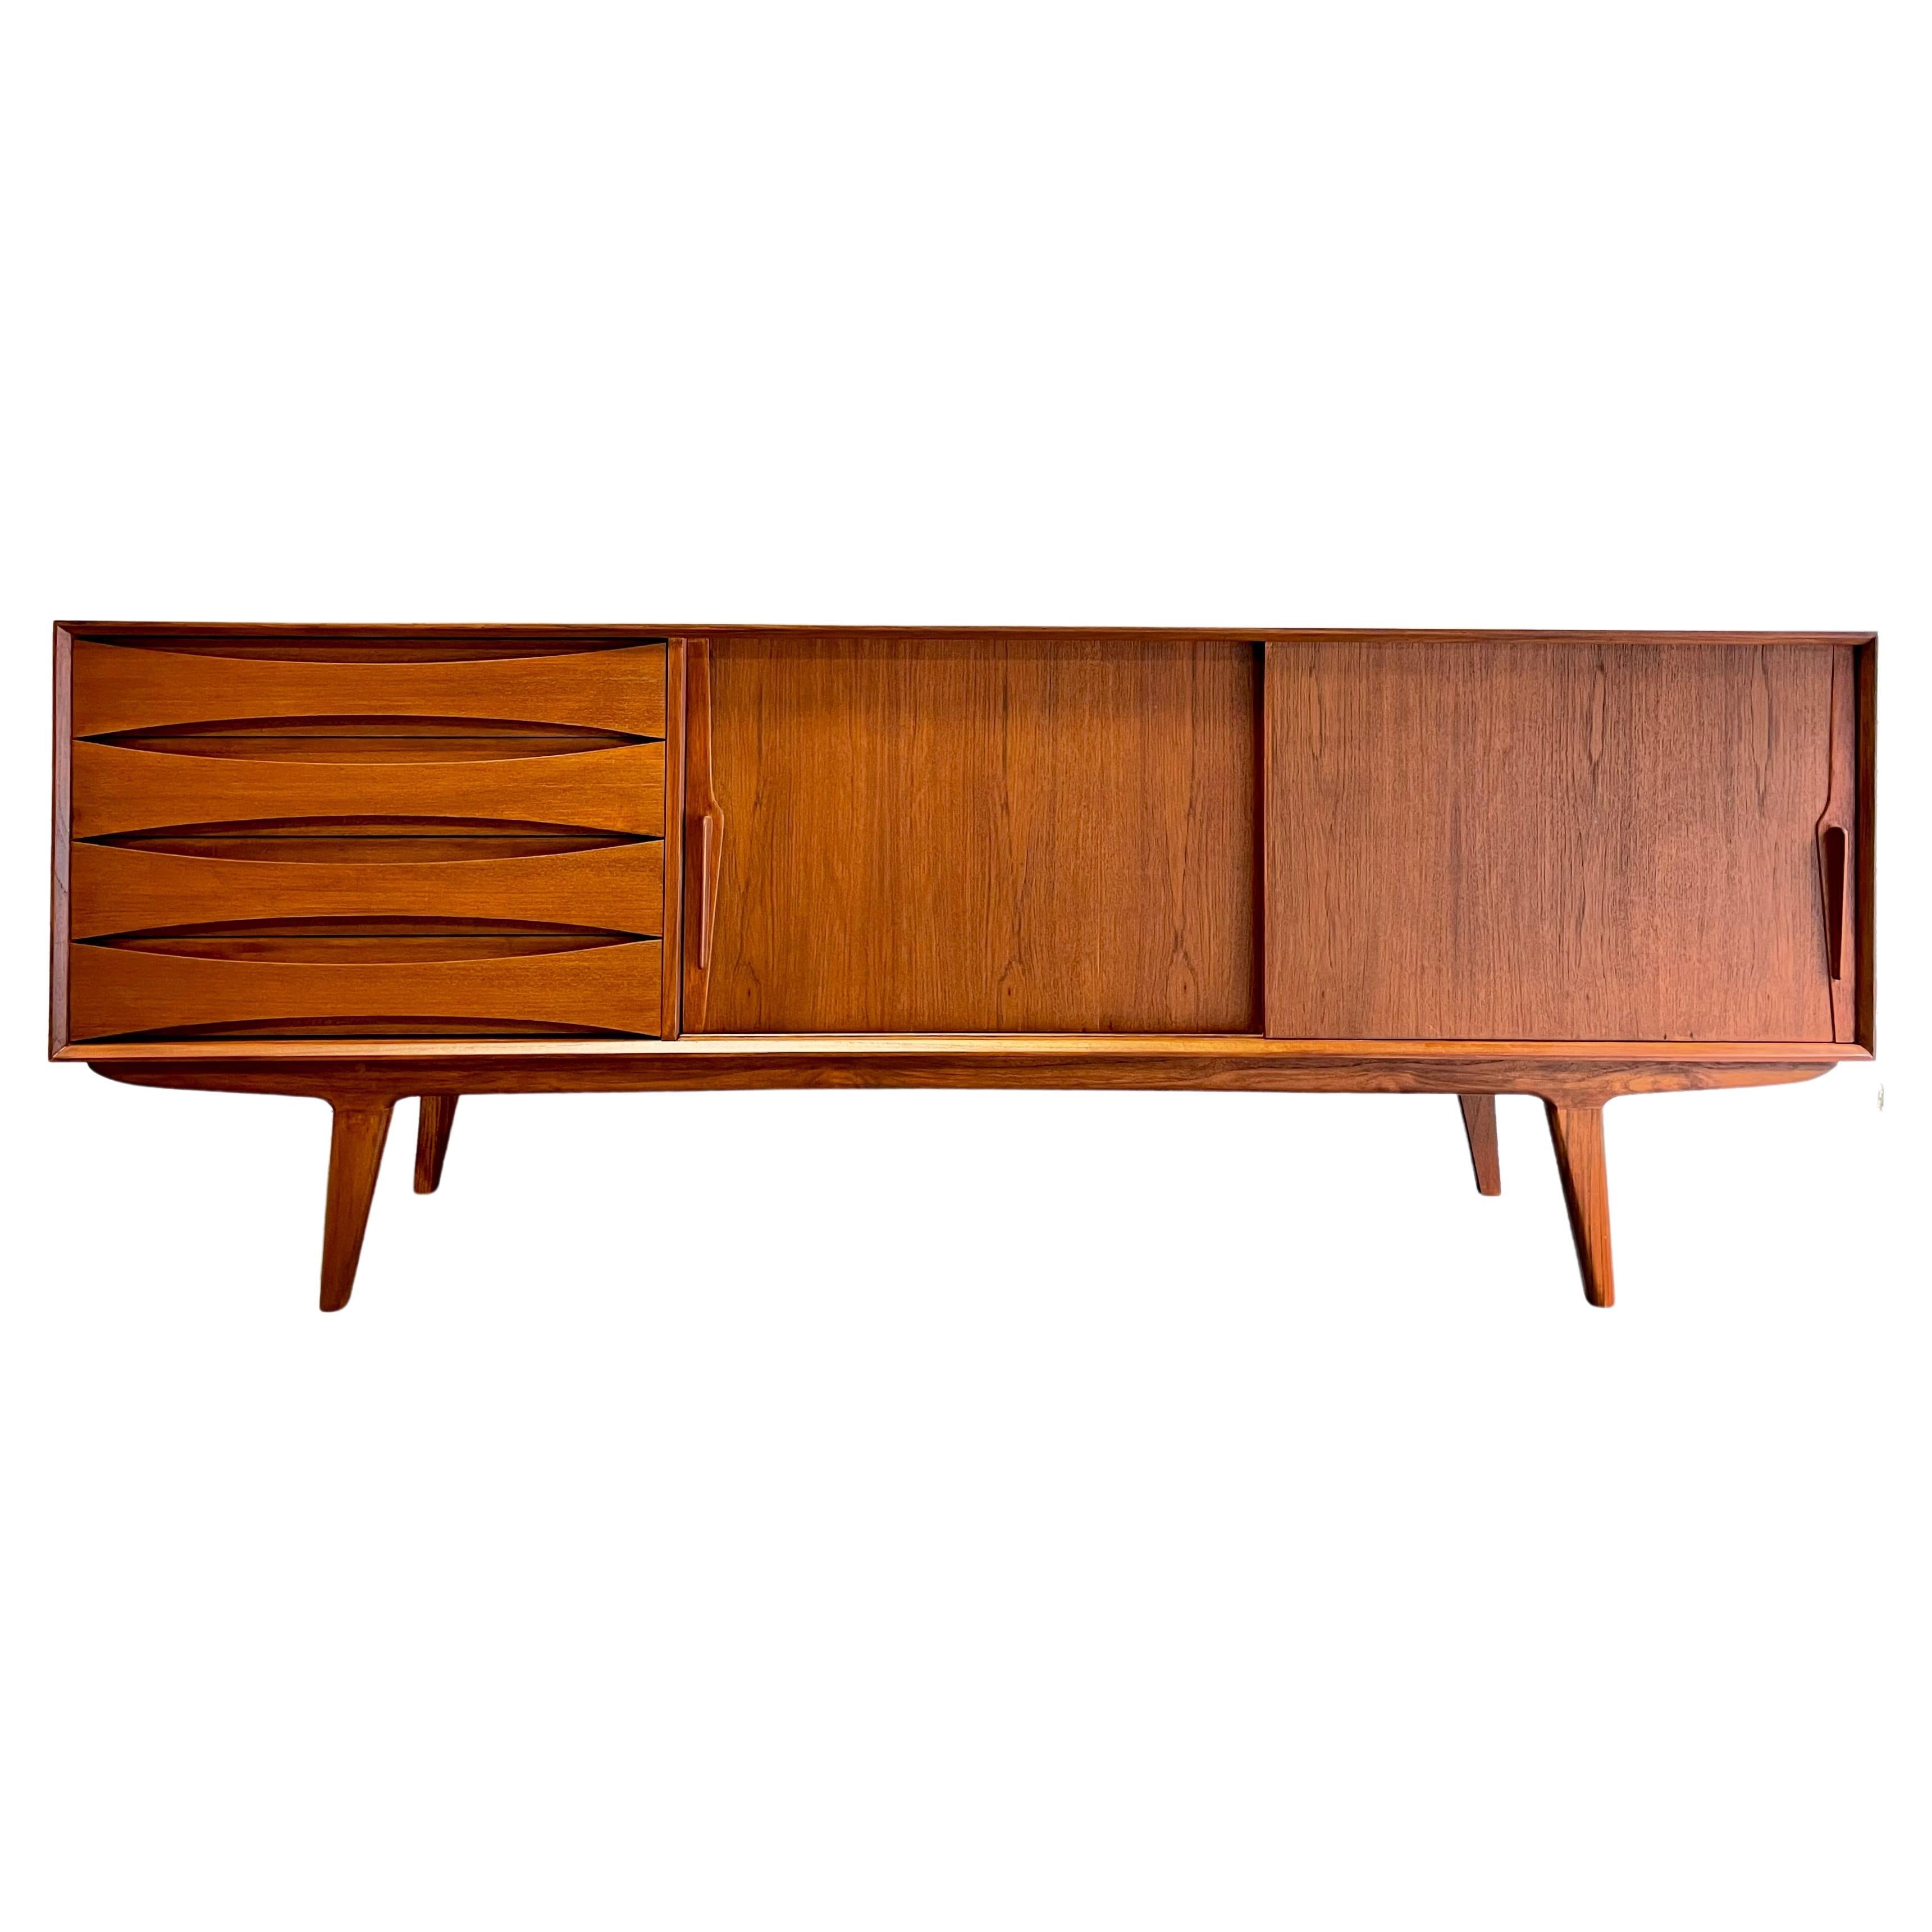 Extra long Mid Century Modern styled handcrafted Credenza / Media Stand. This beauty features exquisite knife-edge hand pulls and sculpted drawer fronts with slightly splayed legs. Stunning wood grains and finished back allow you to float the